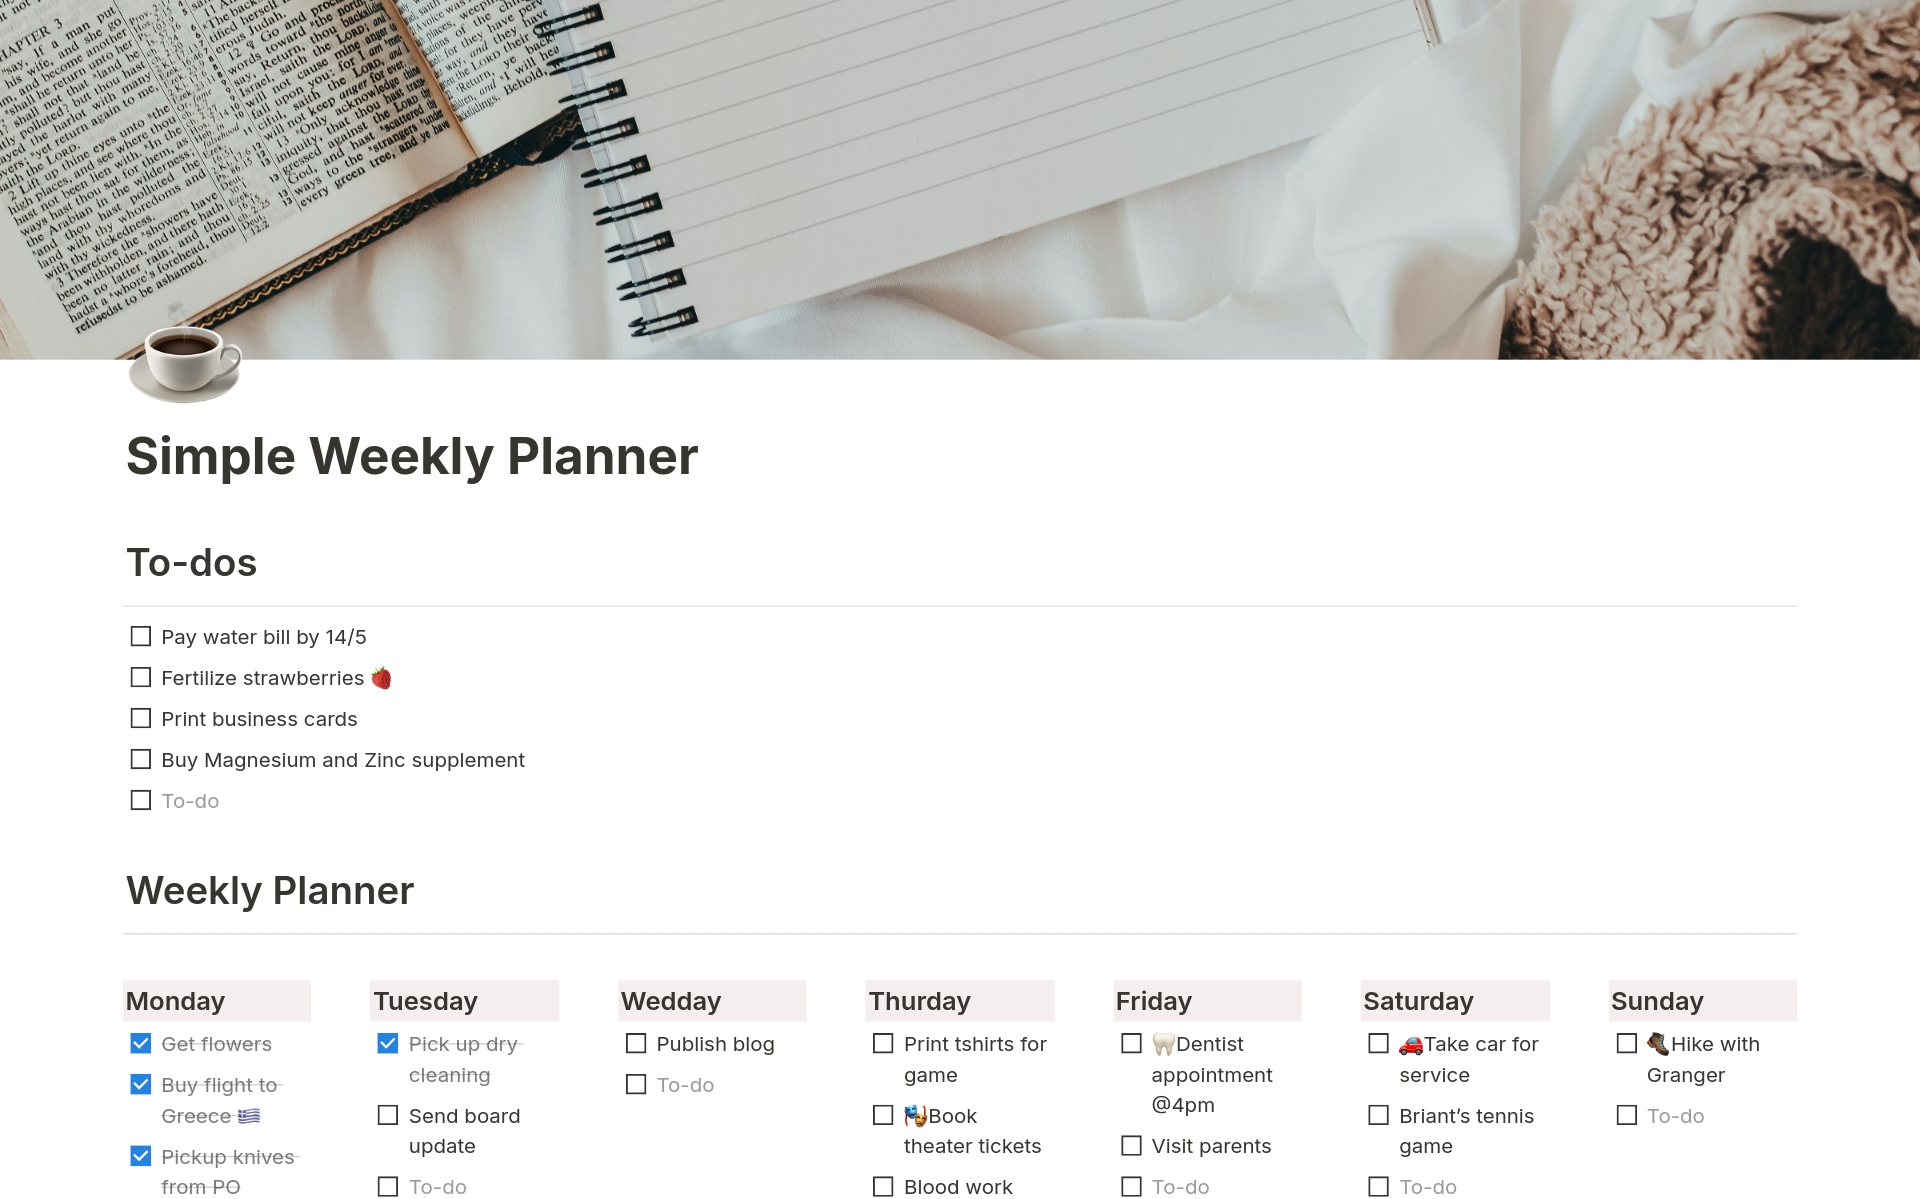 A simple weekly planner for tracking to-dos and scheduling them by dragging and dropping.